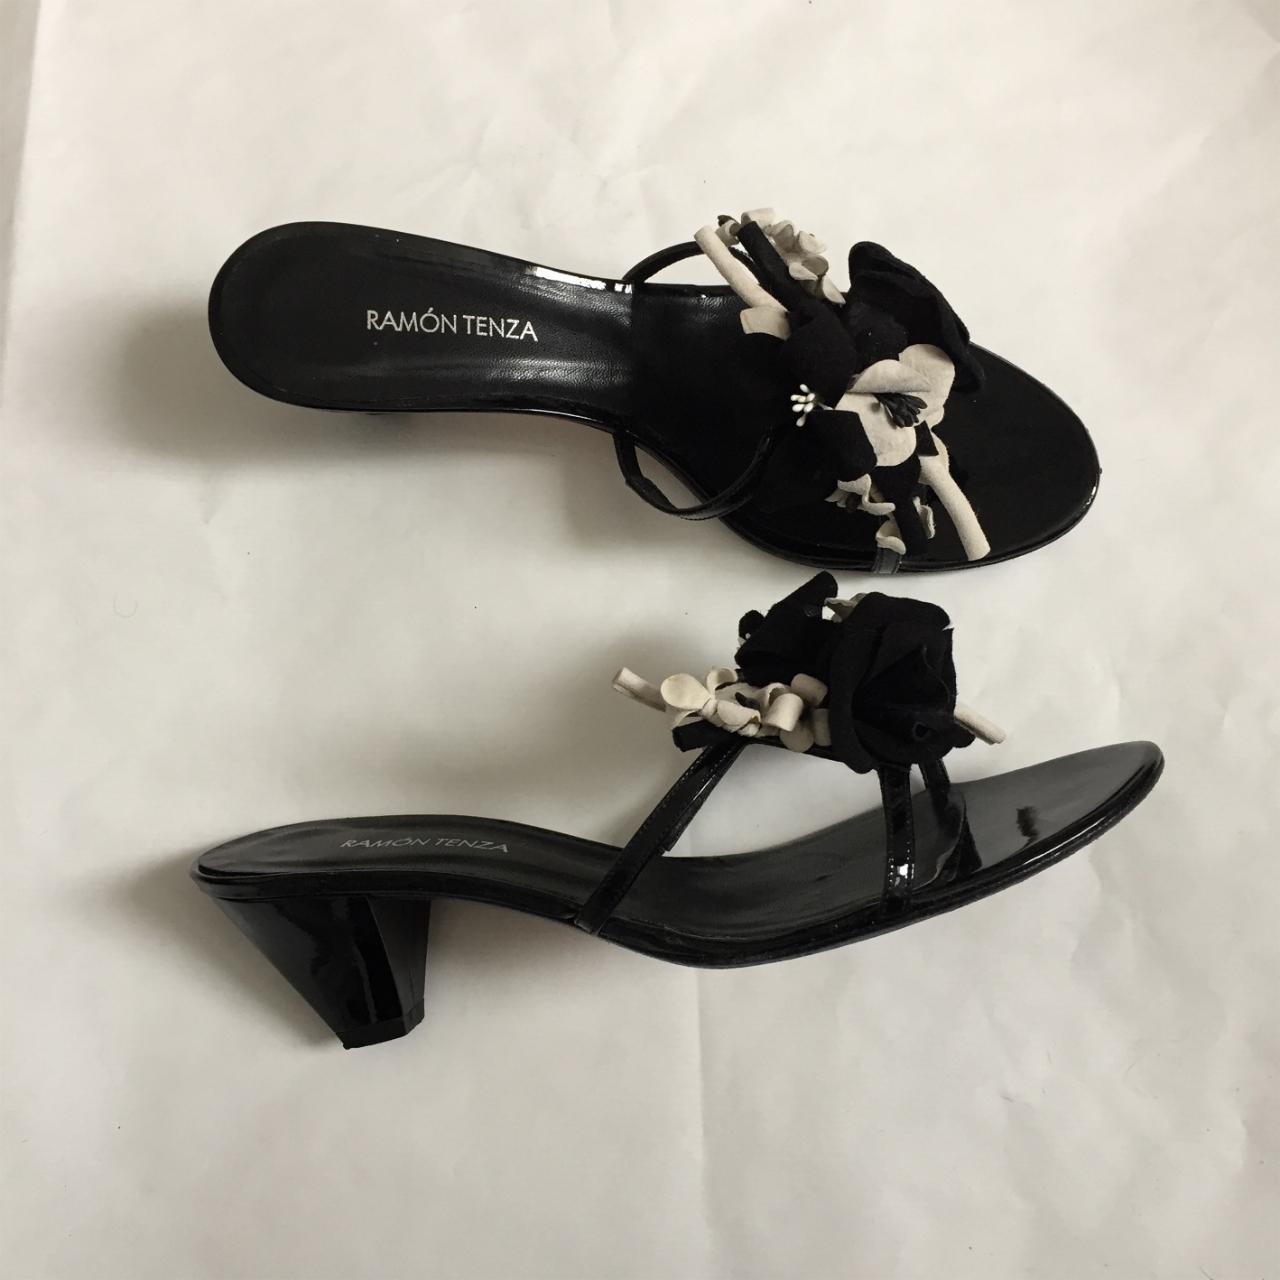 RAMON TENZA Sandals with leather black and white... - Depop